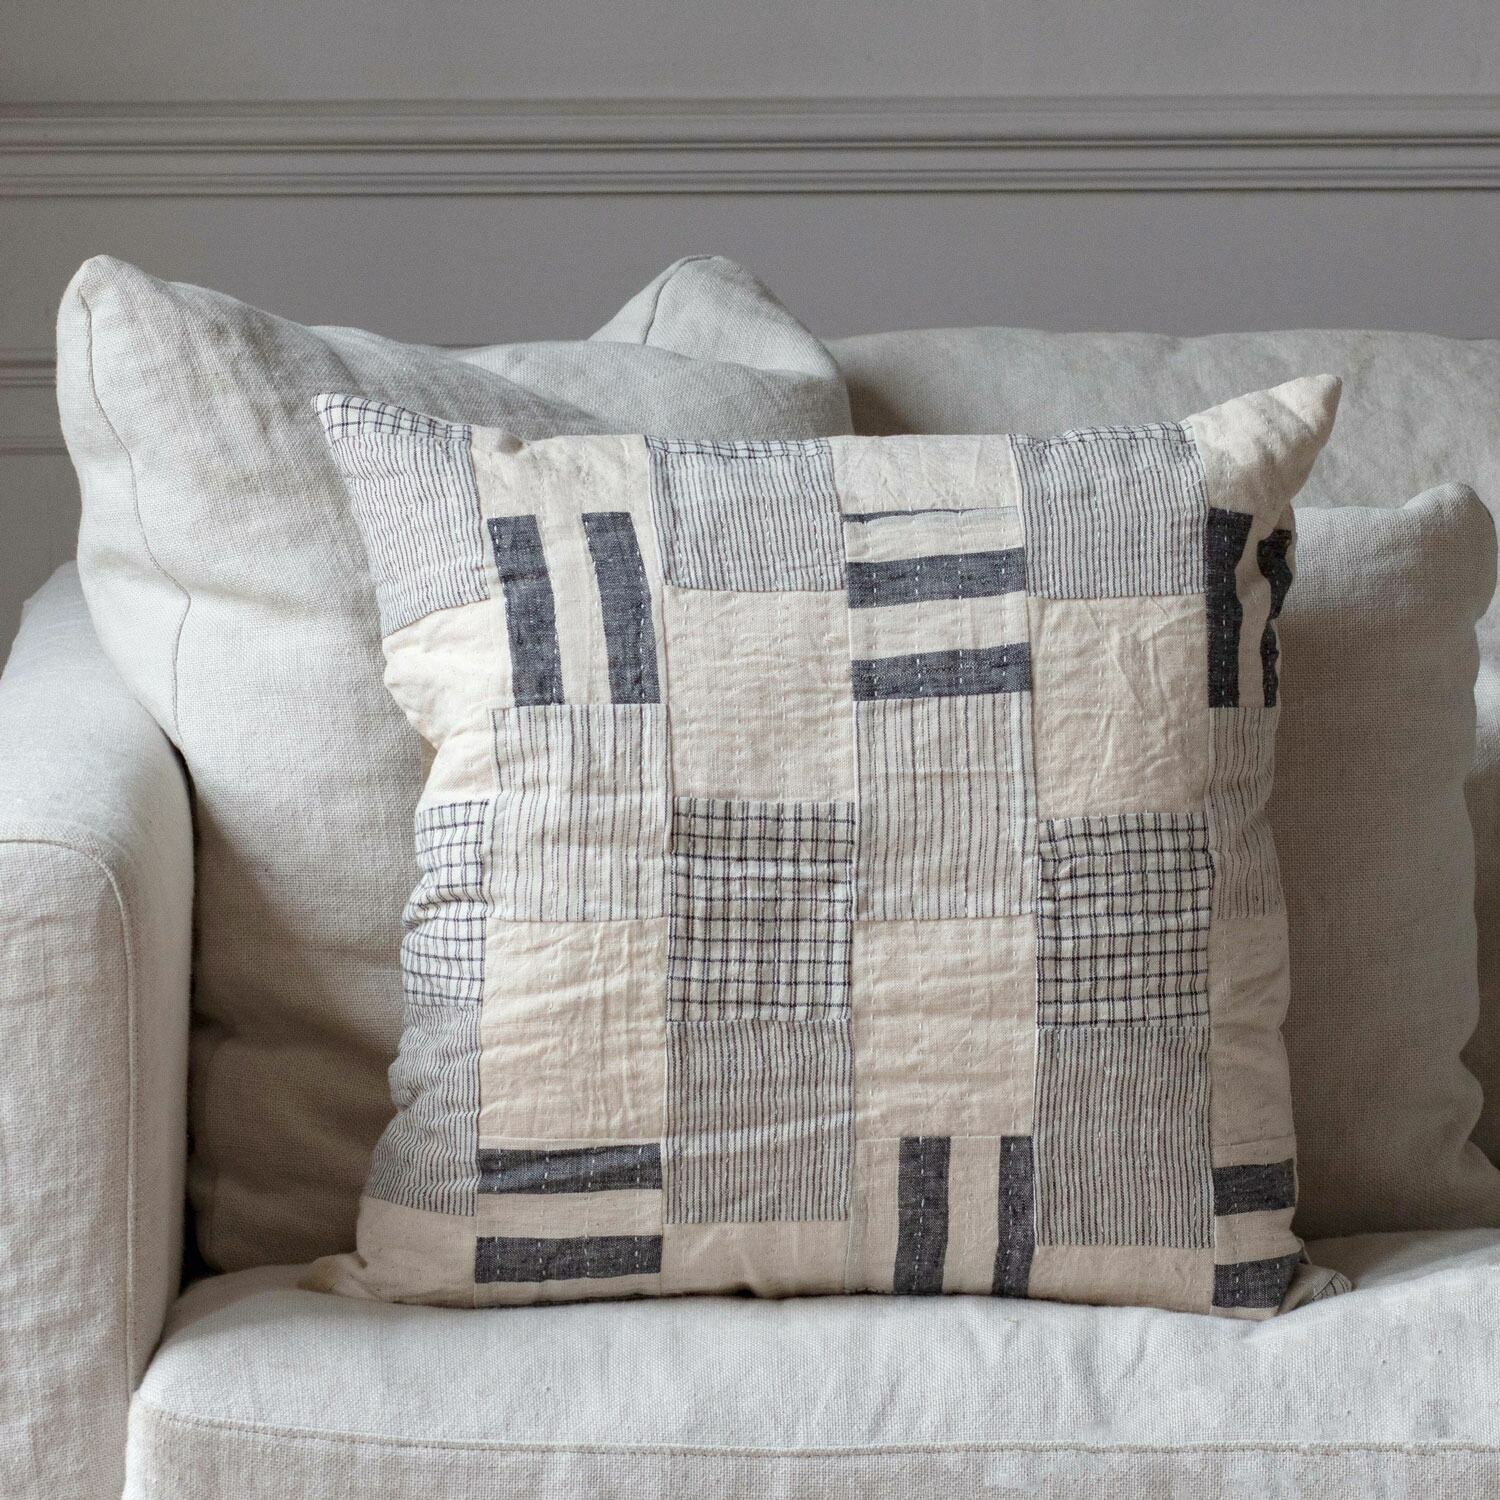 Read more about Graham and green naya organic cotton patchwork cushion